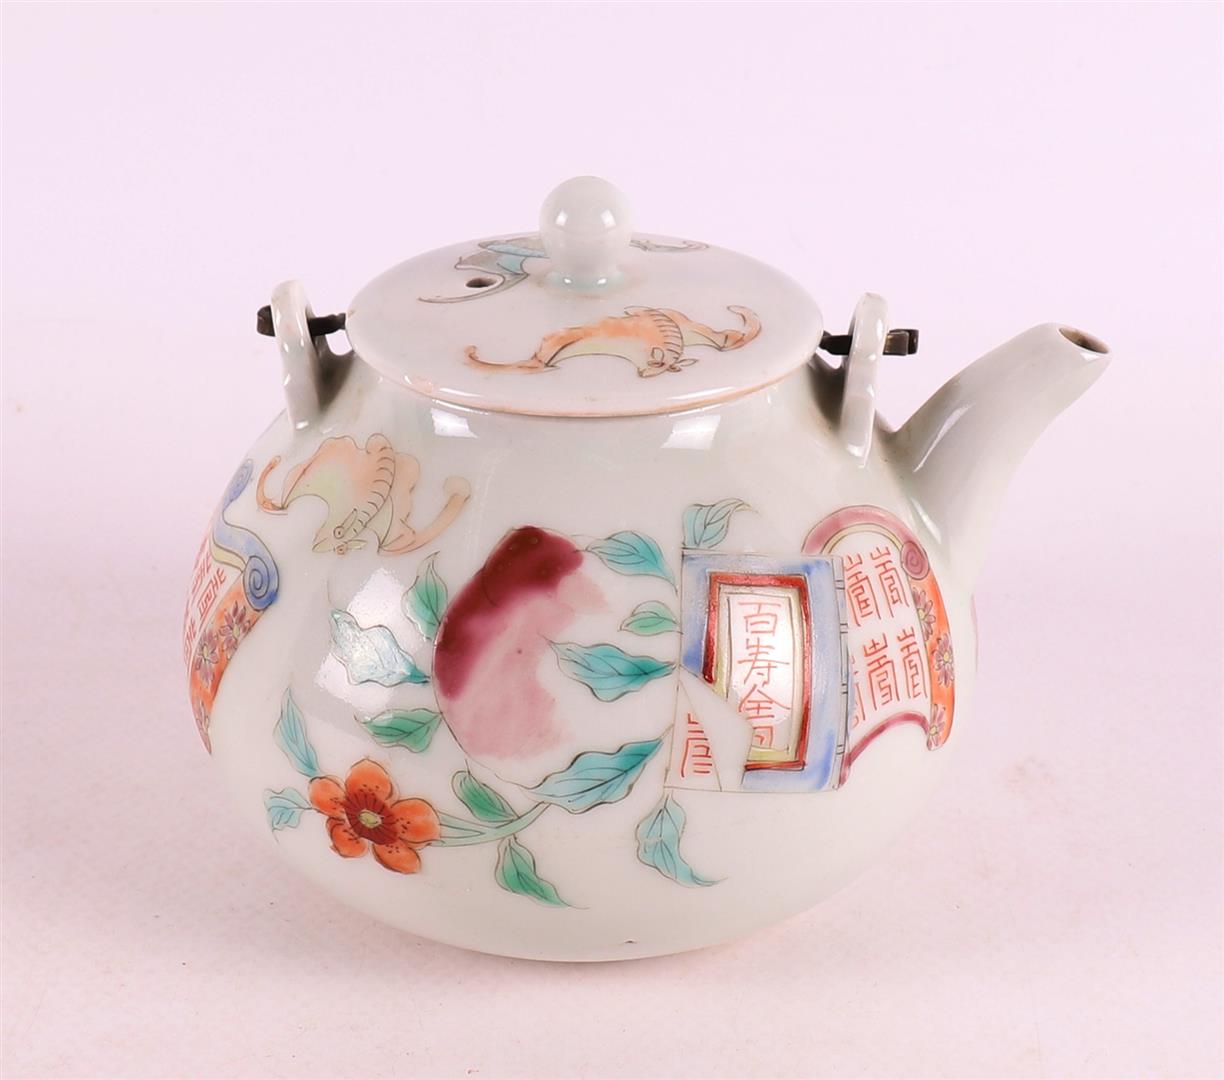 A porcelain teapot, China 19th century. - Image 2 of 8